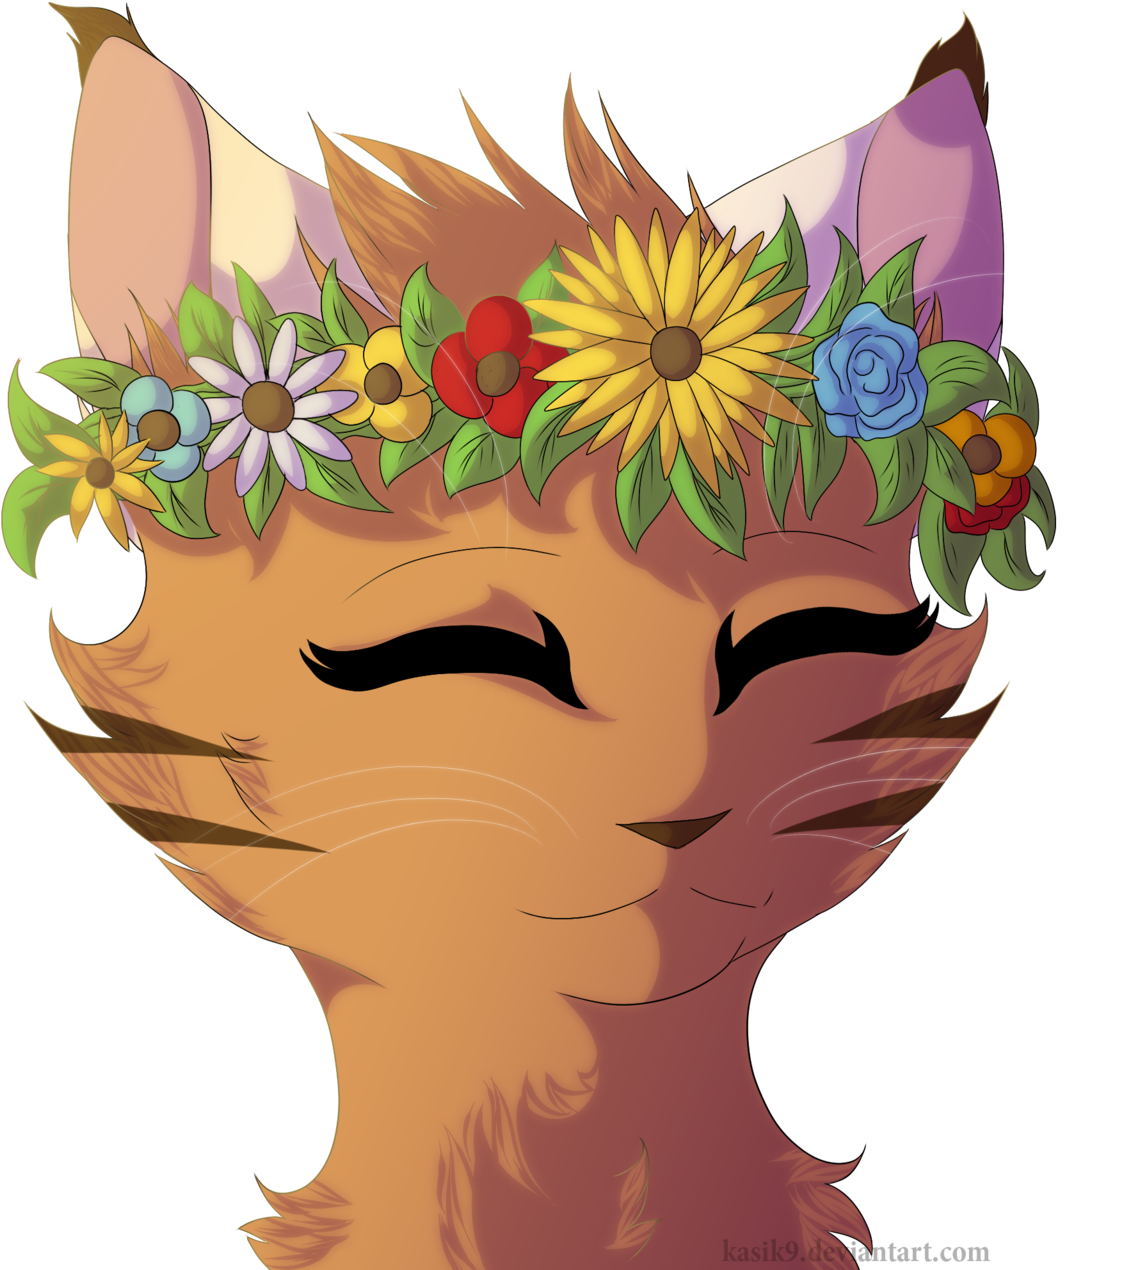 Flower Crowns Are Pretty By Kasik9-d8w38lb - Cat With Flower Crown Art (1280x1280)